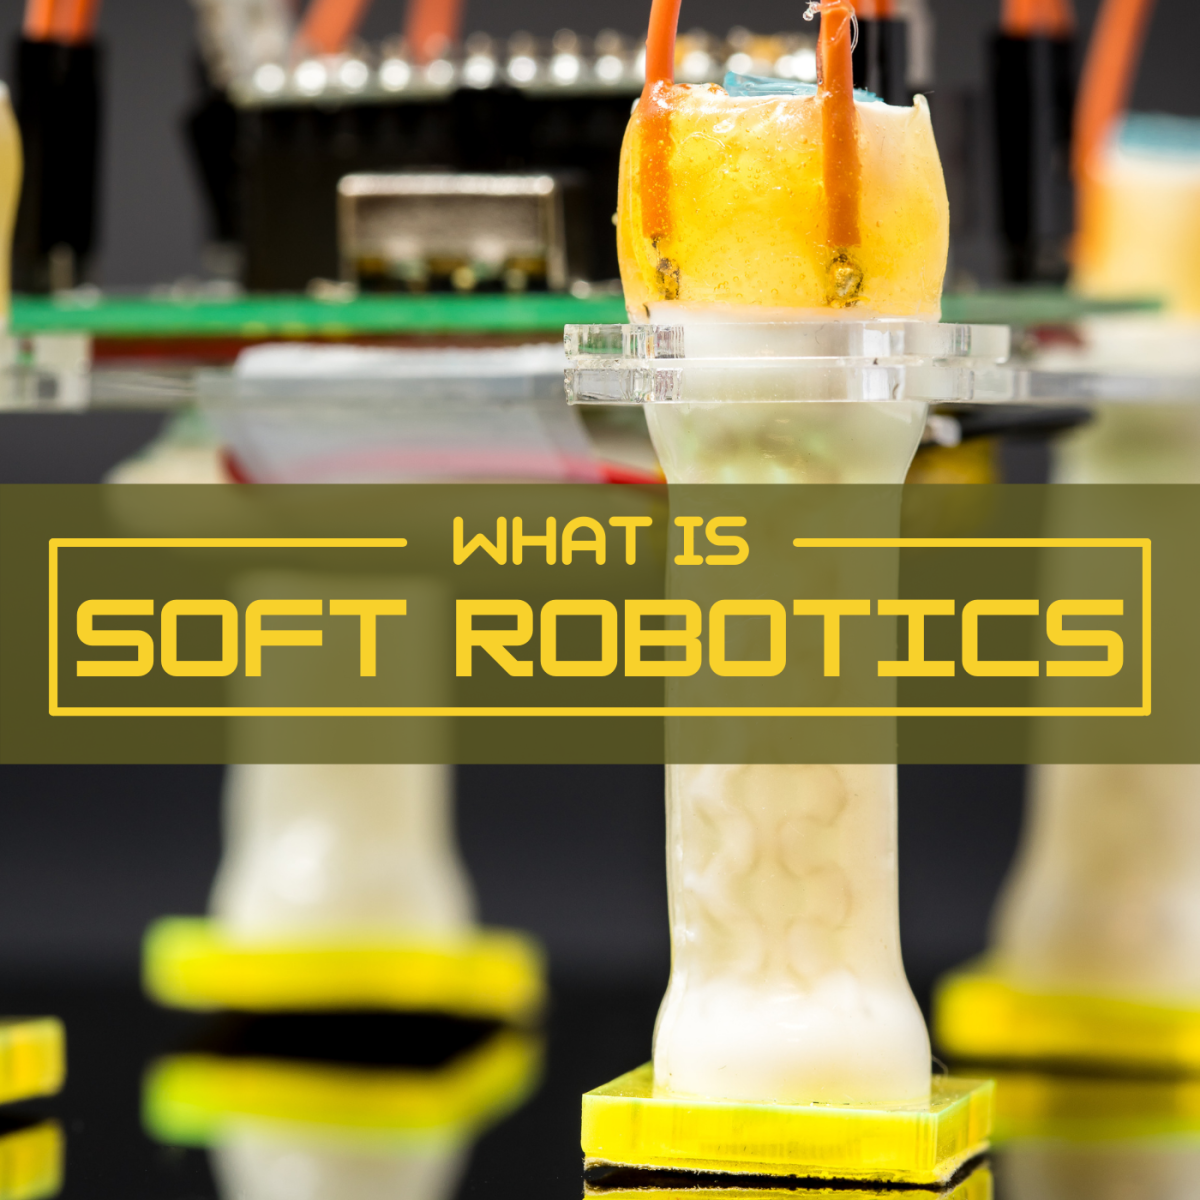 Soft robots are nothing like the assembly-line machines used in automotive manufacturing. 